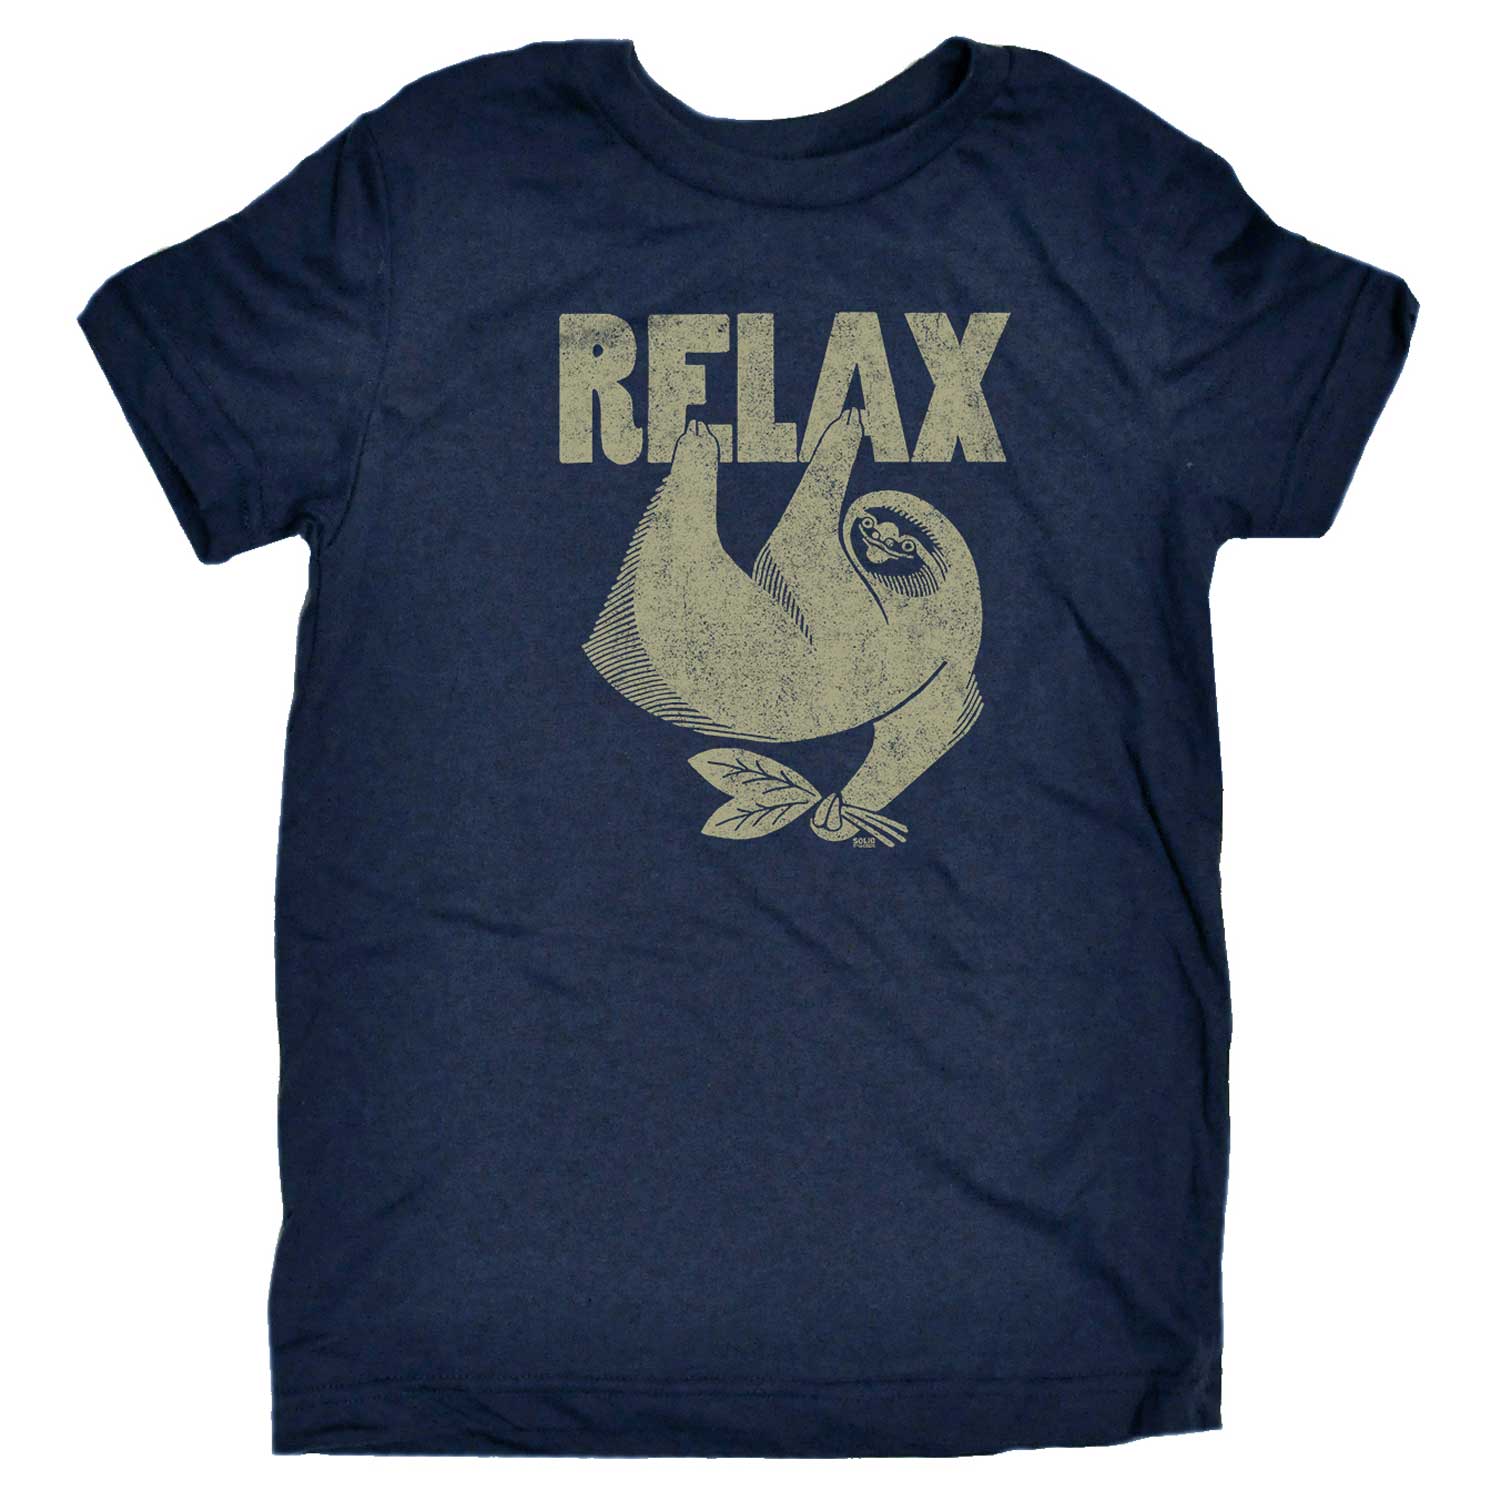 Kids Relax Sloth Retro Mindfulness Graphic T-Shirt | Cute Funny Animal Tee | Solid Threads